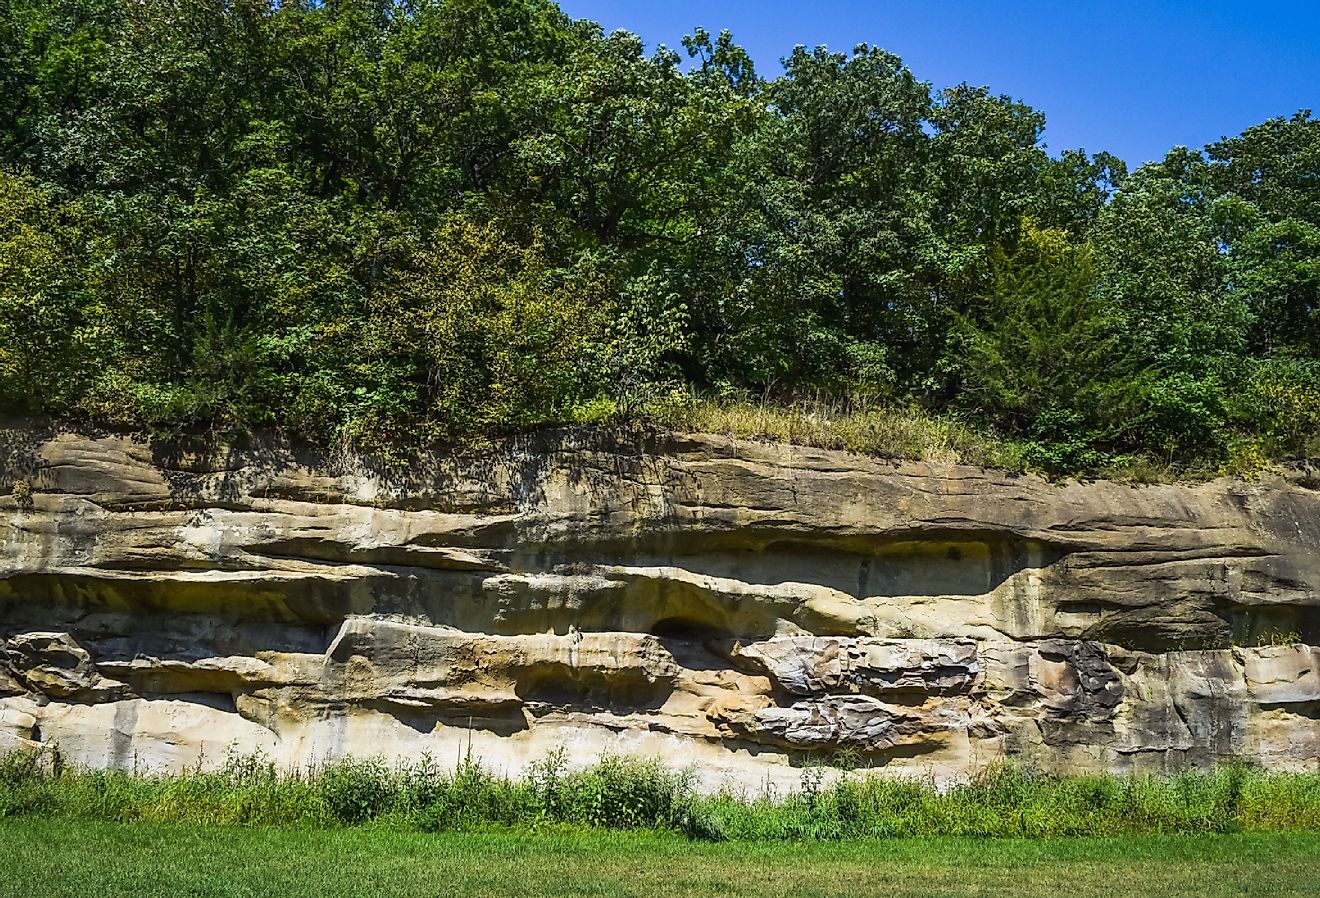 View on hike in Ledges State Park, Iowa. Image credit drewthehobbit via Shutterstock.